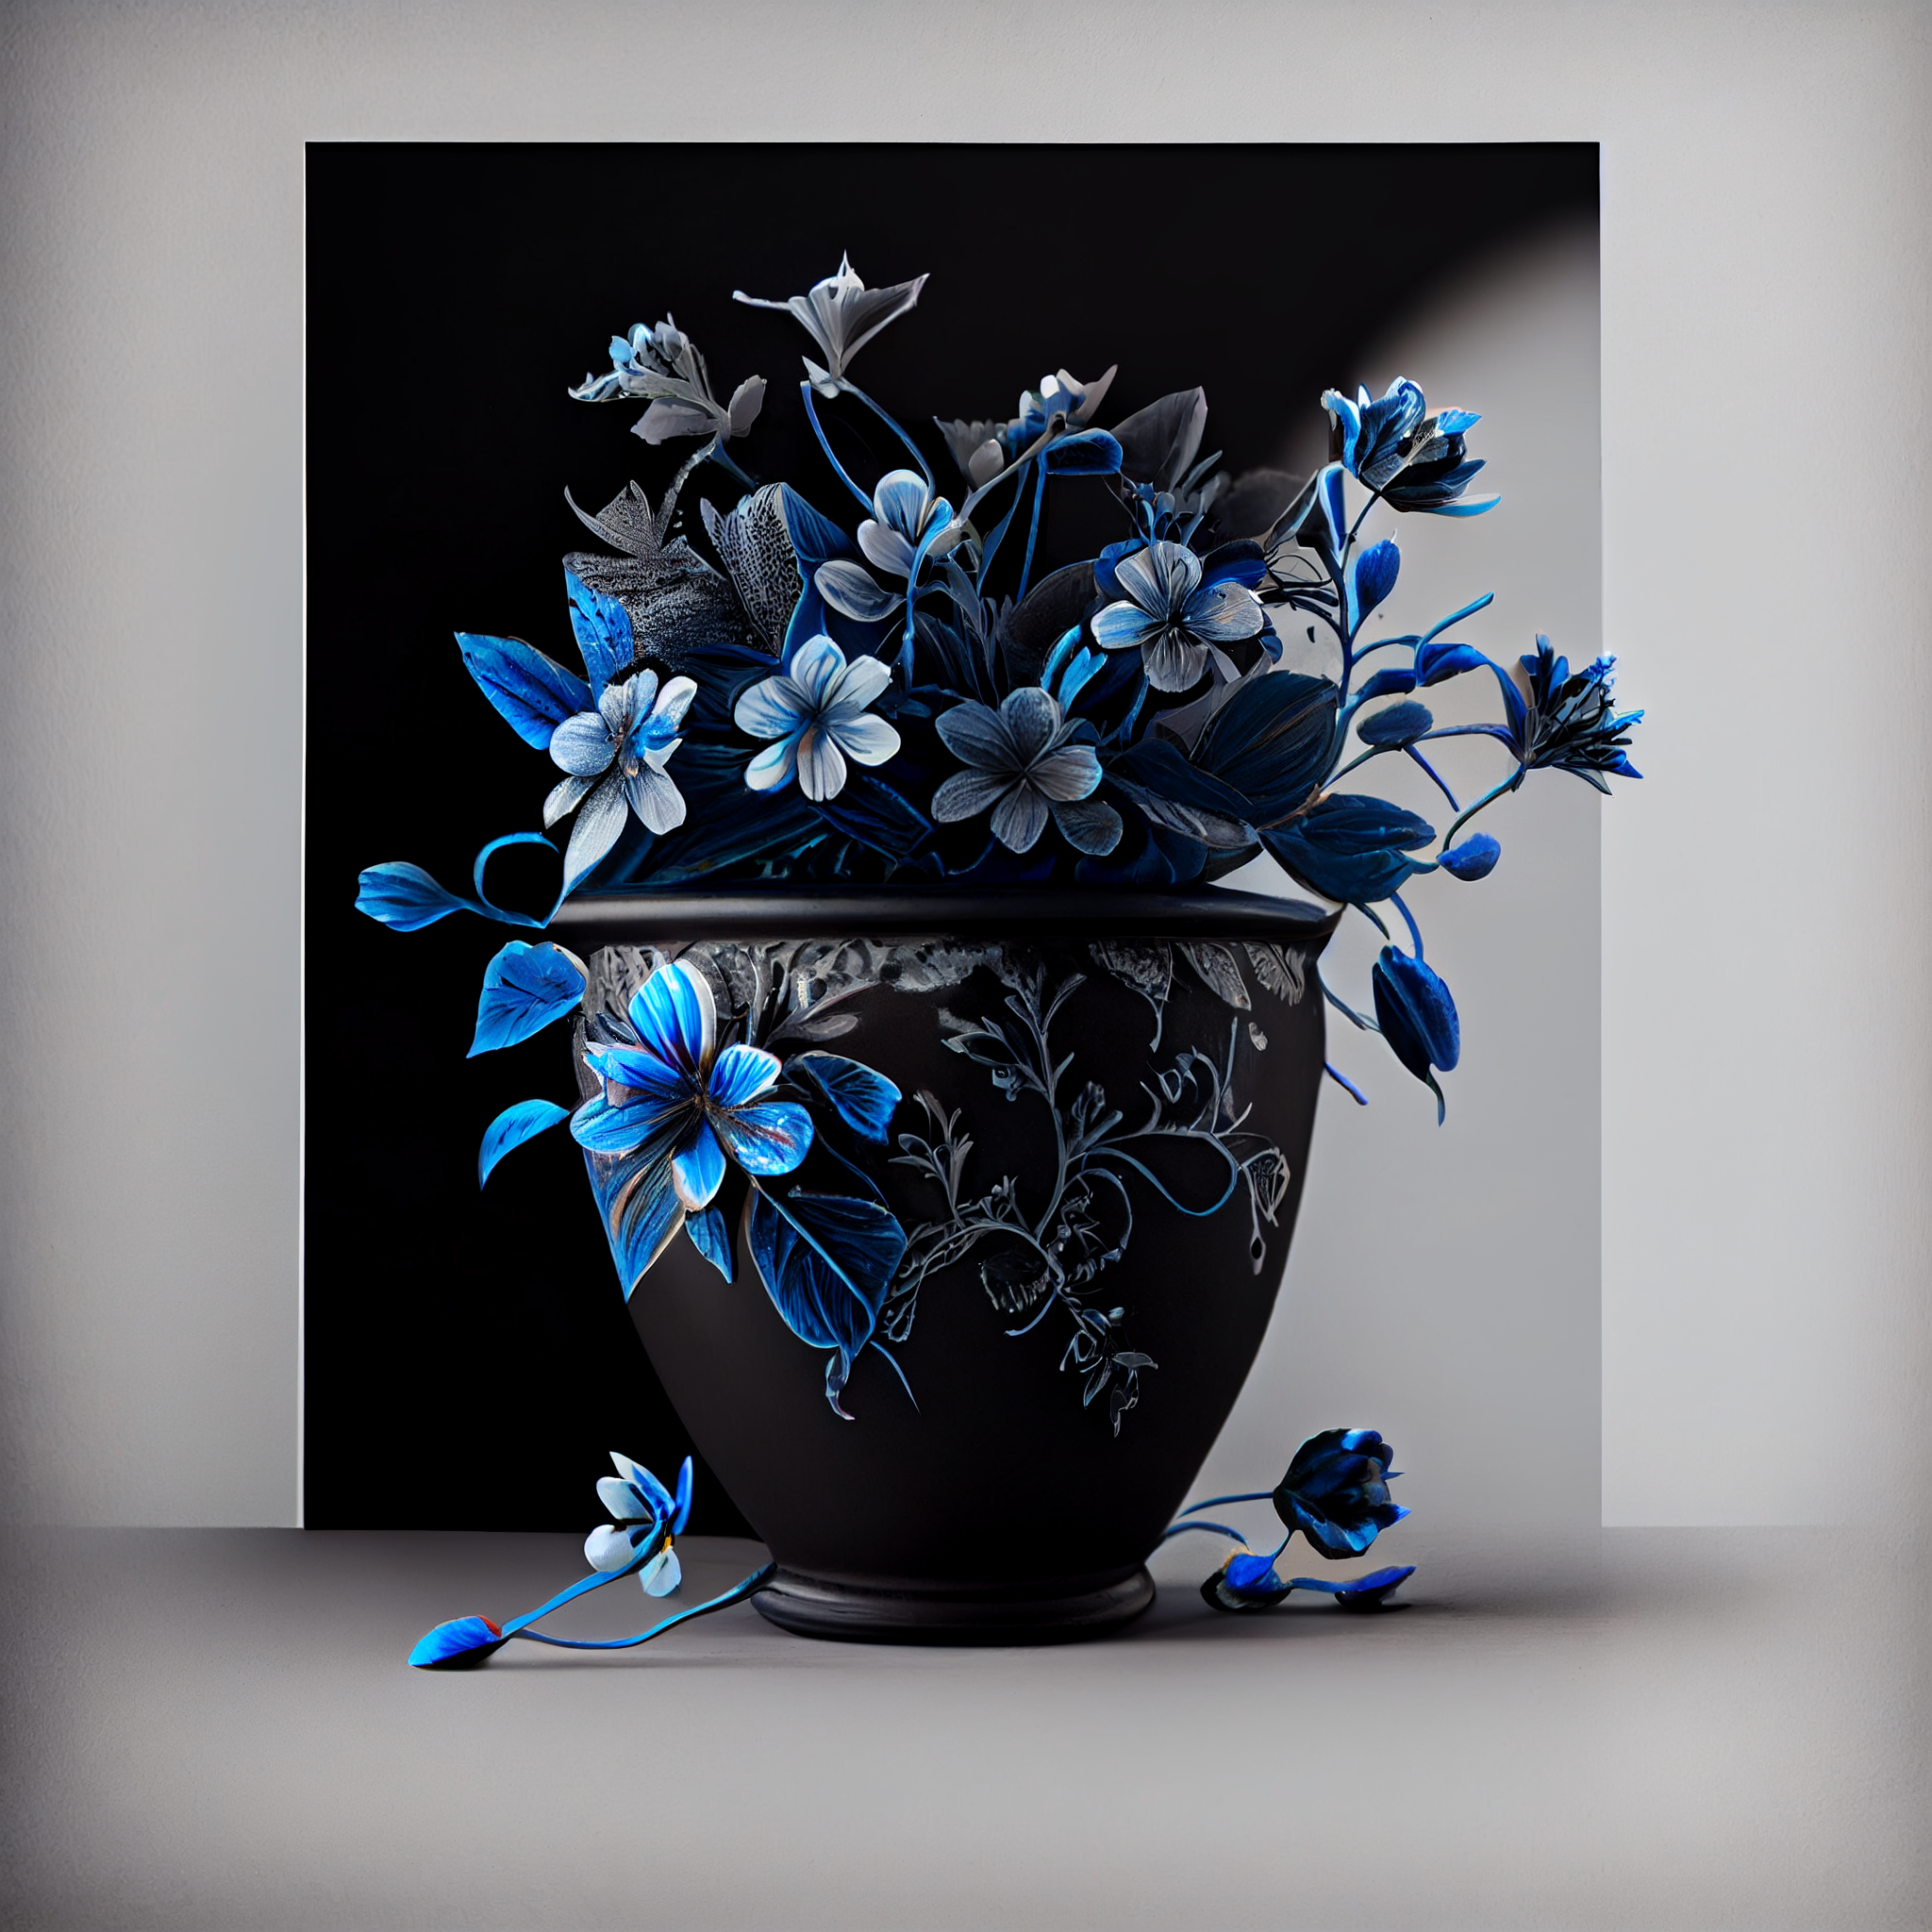 Blue and White Flowers in a Black Pot Art Print